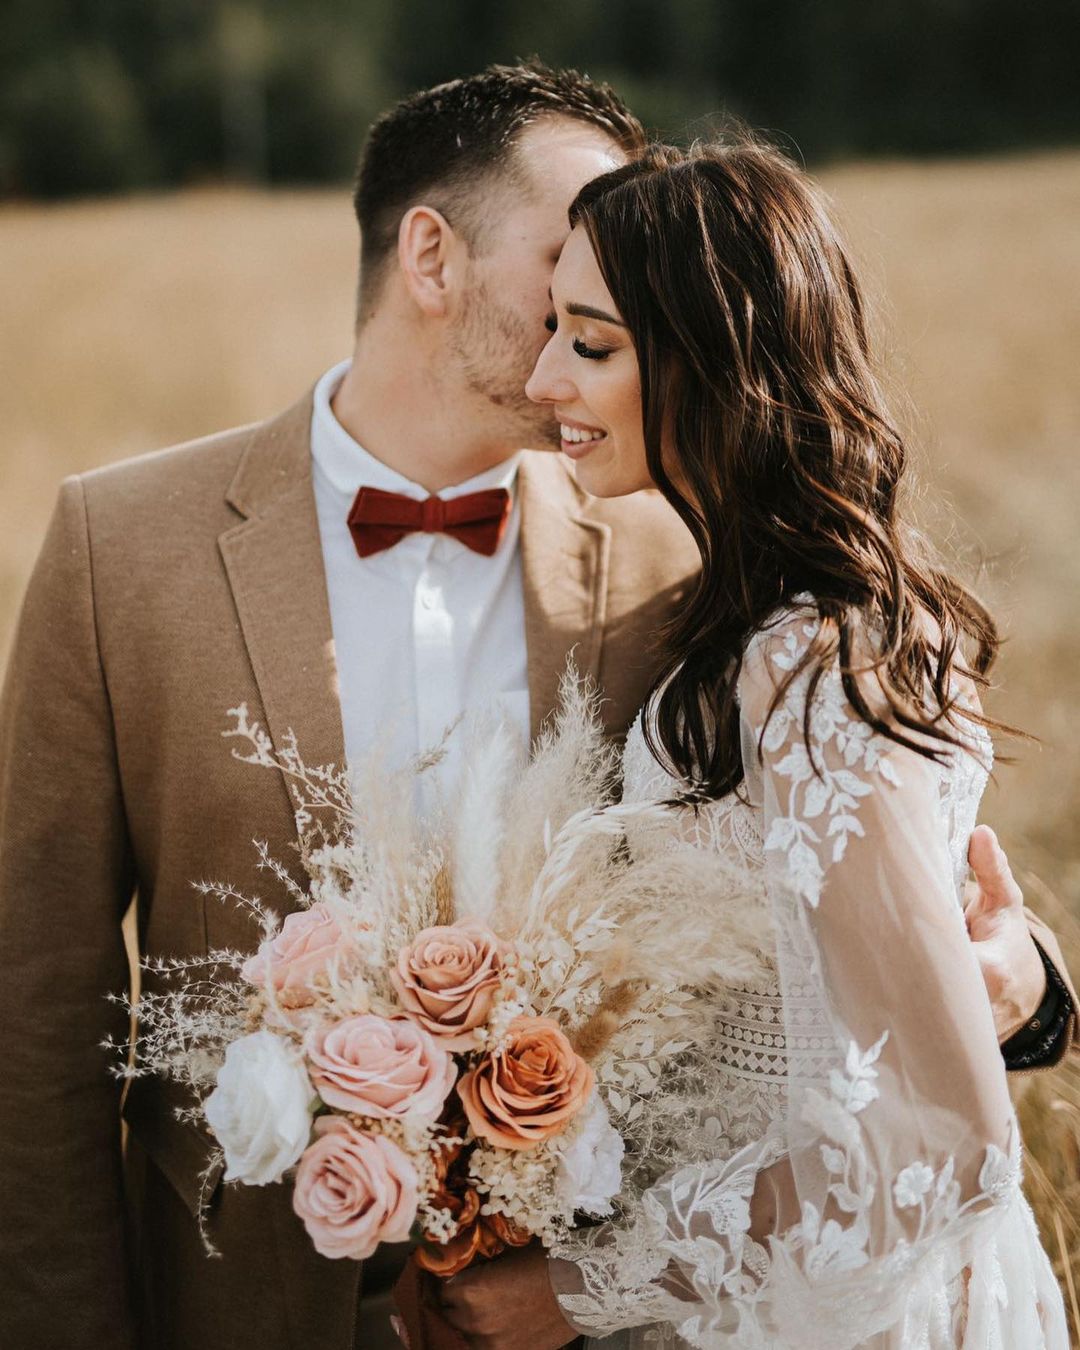 dried pampas grass wedding bouquet with roses via pampasoutlet